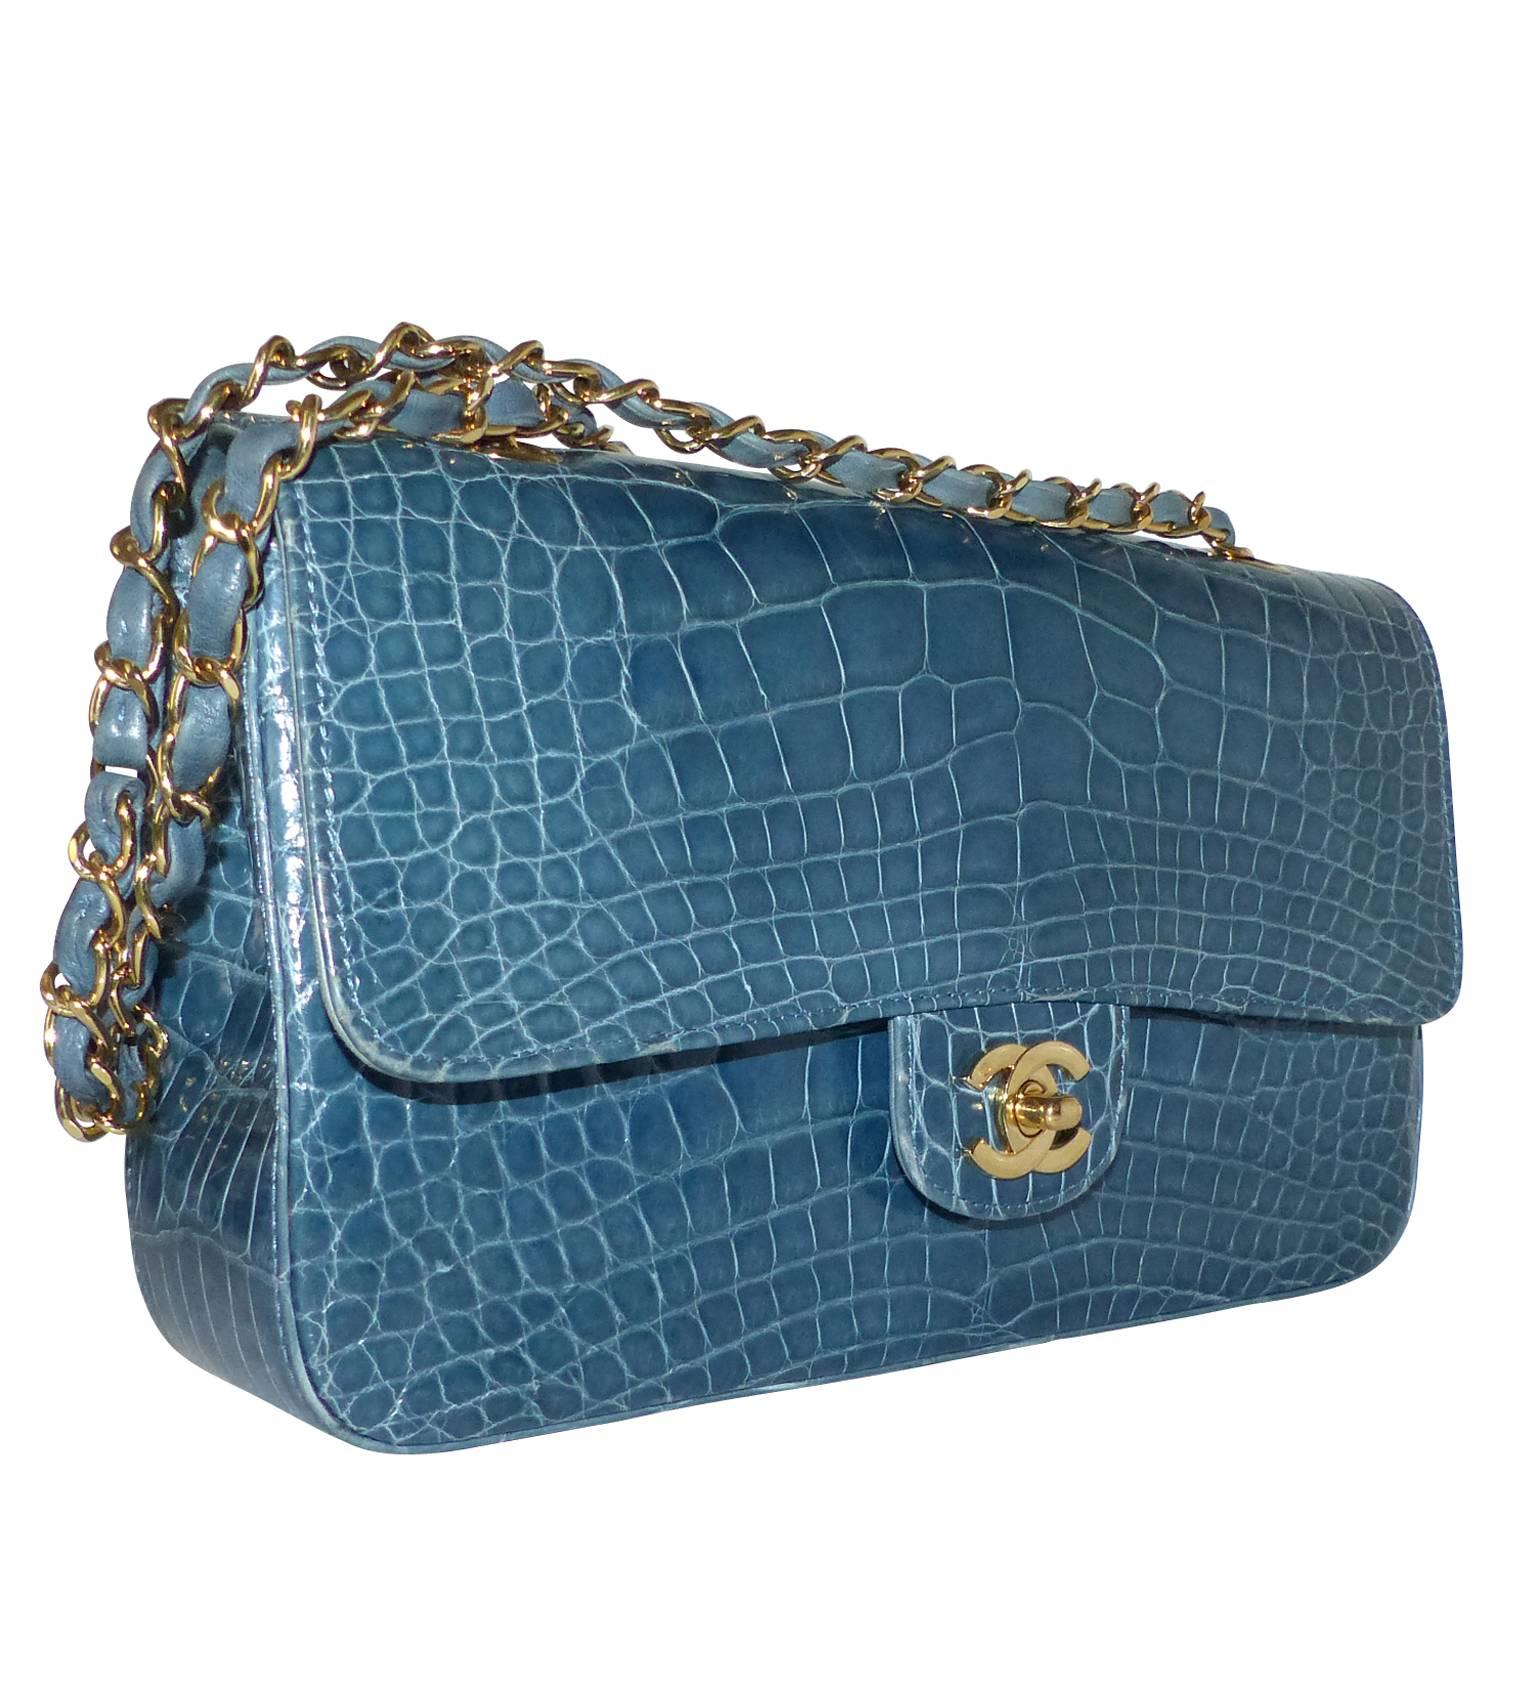 FAN-TAST-IC Chanel Blue Alligator Timeless 
Extremely rare in the exotic versions, this strikingly beautiful piece is a must have for any collector. 
Chanel 2.55 Medium Size
Color : Bleu de Prusse or Bleu Jean's
Dimensions : L 26 x H 15 x P 6